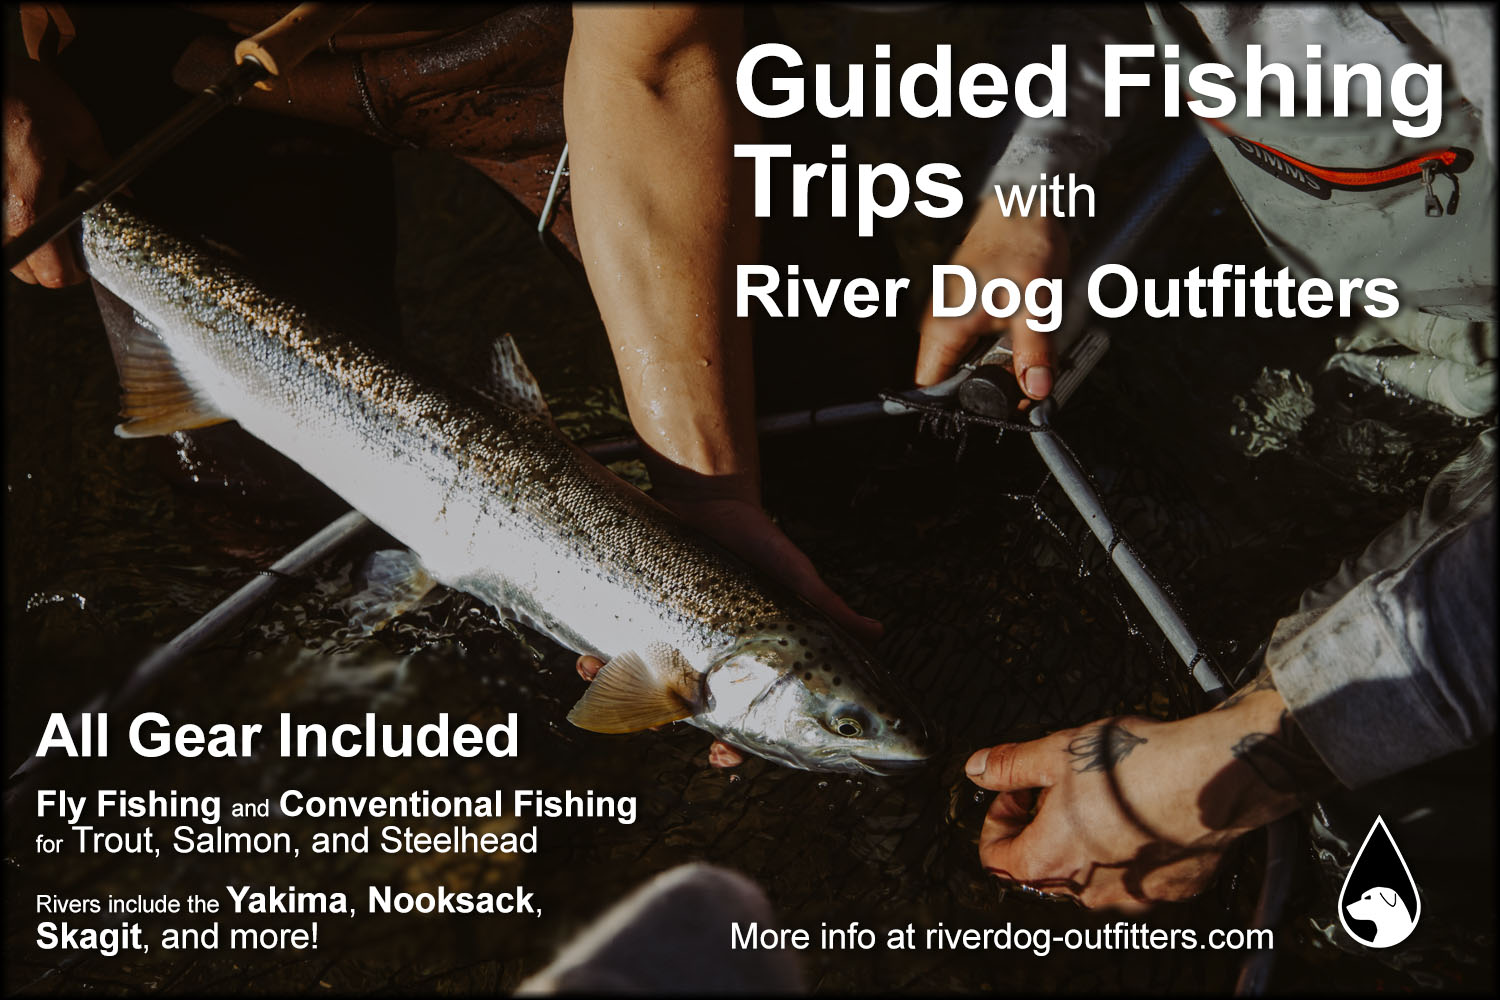 Fishing Guides for Beginners and Experts - River Dog Outfitters